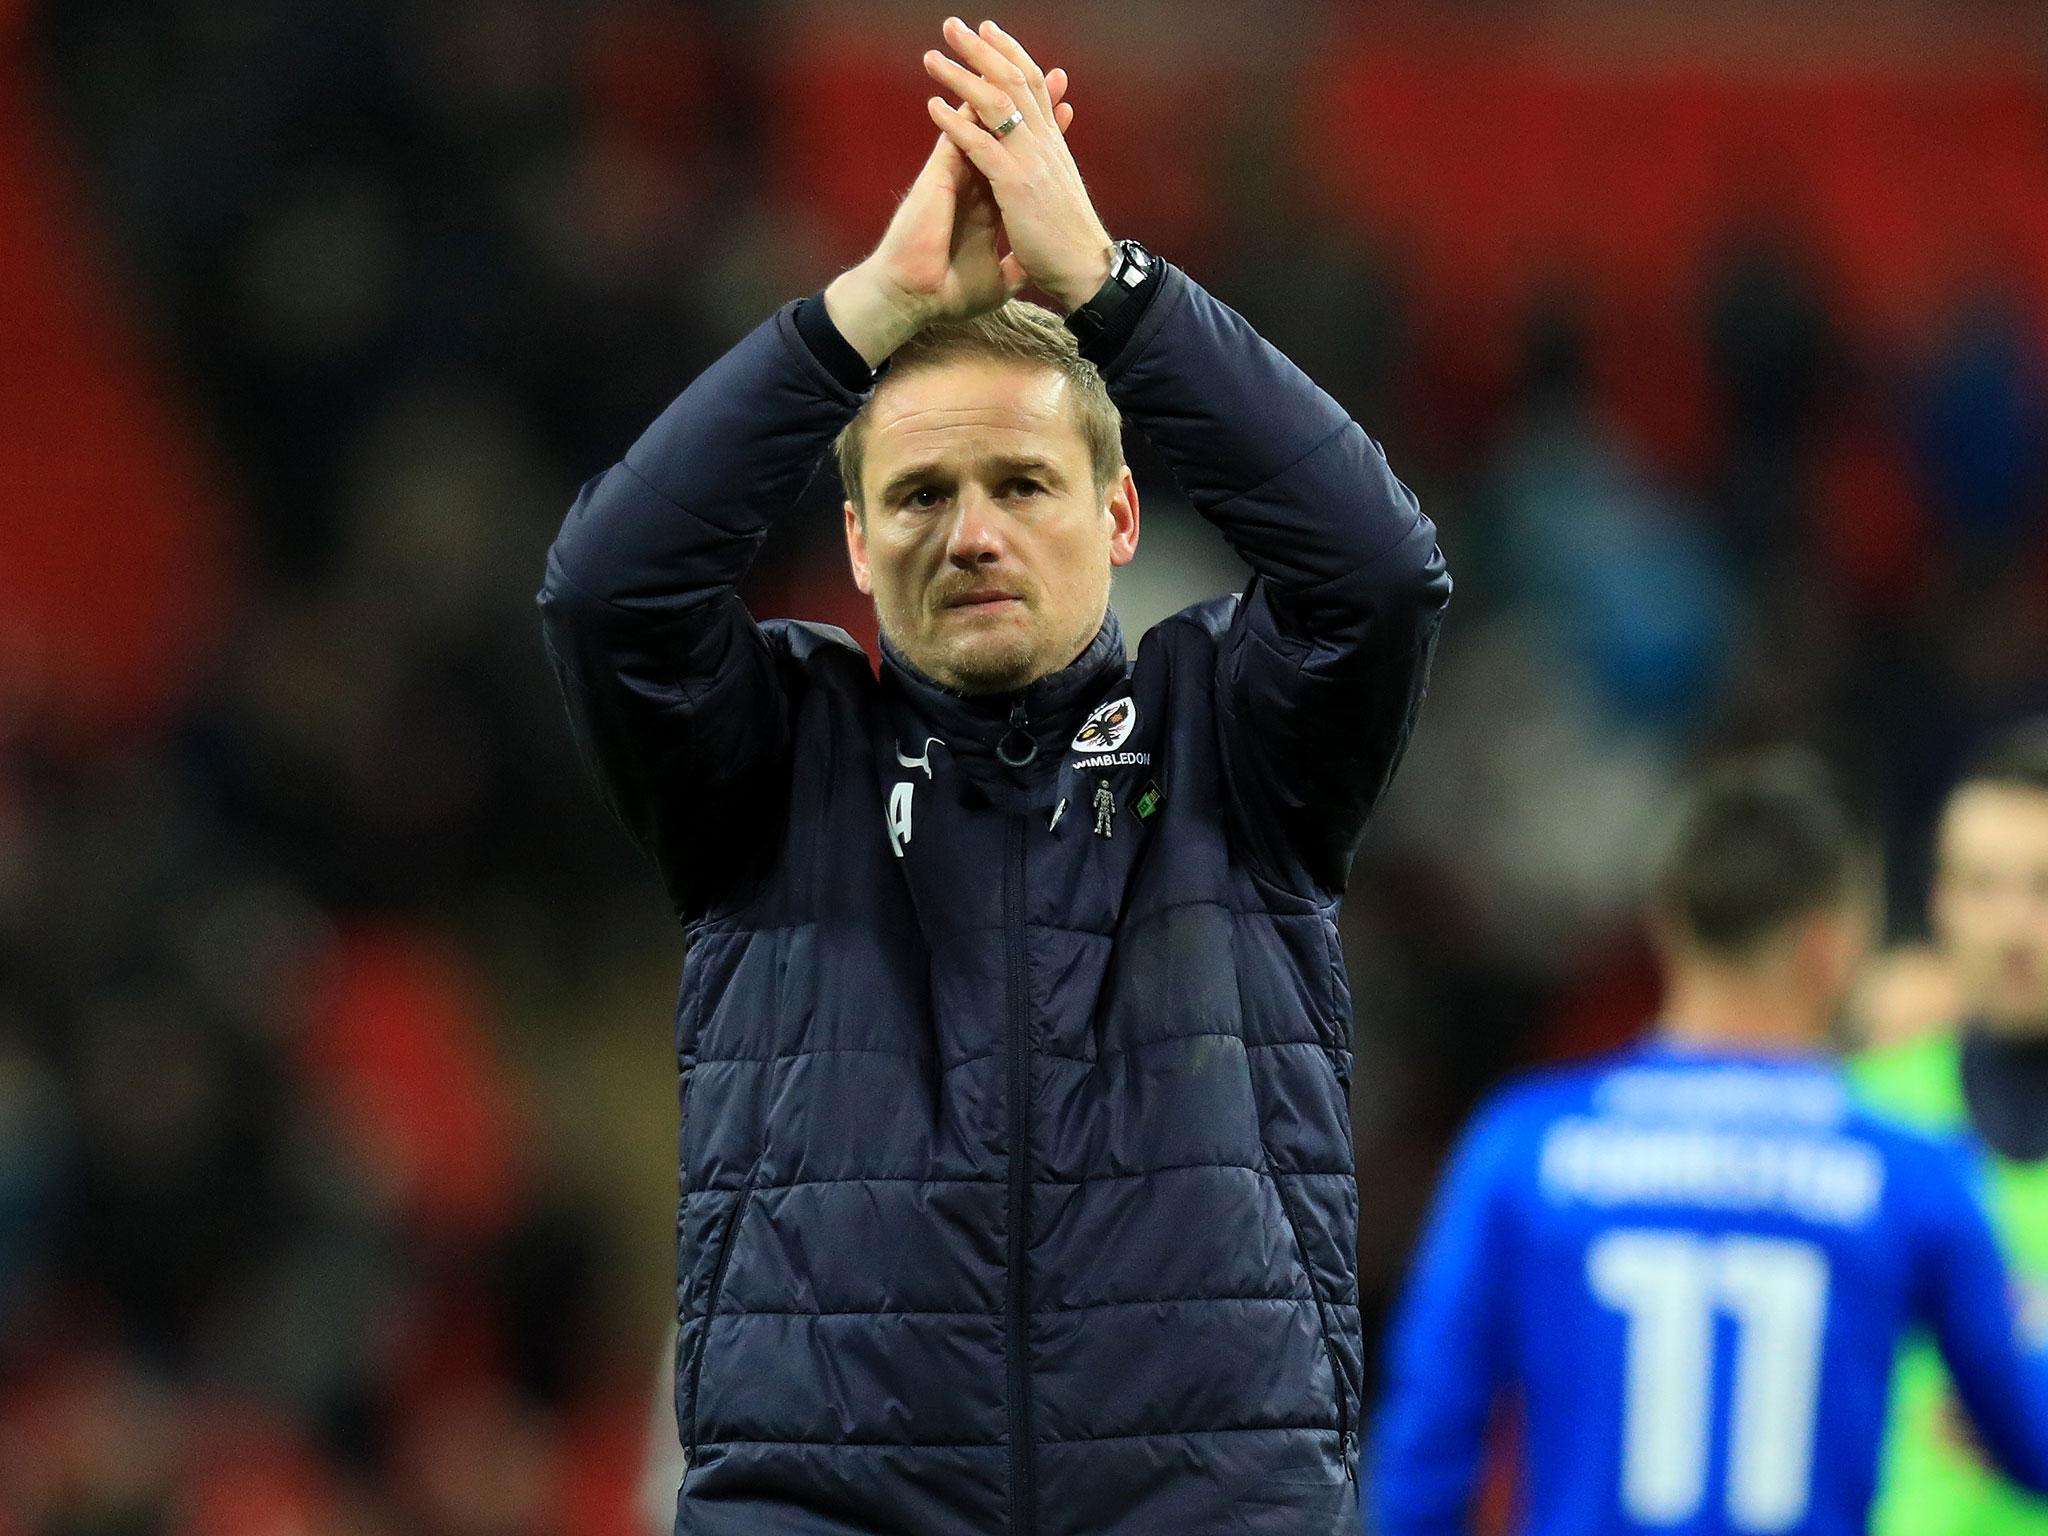 AFC Wimbledon manager Neal Ardley said his assistant was taken aback by Harry Kane's inclusion